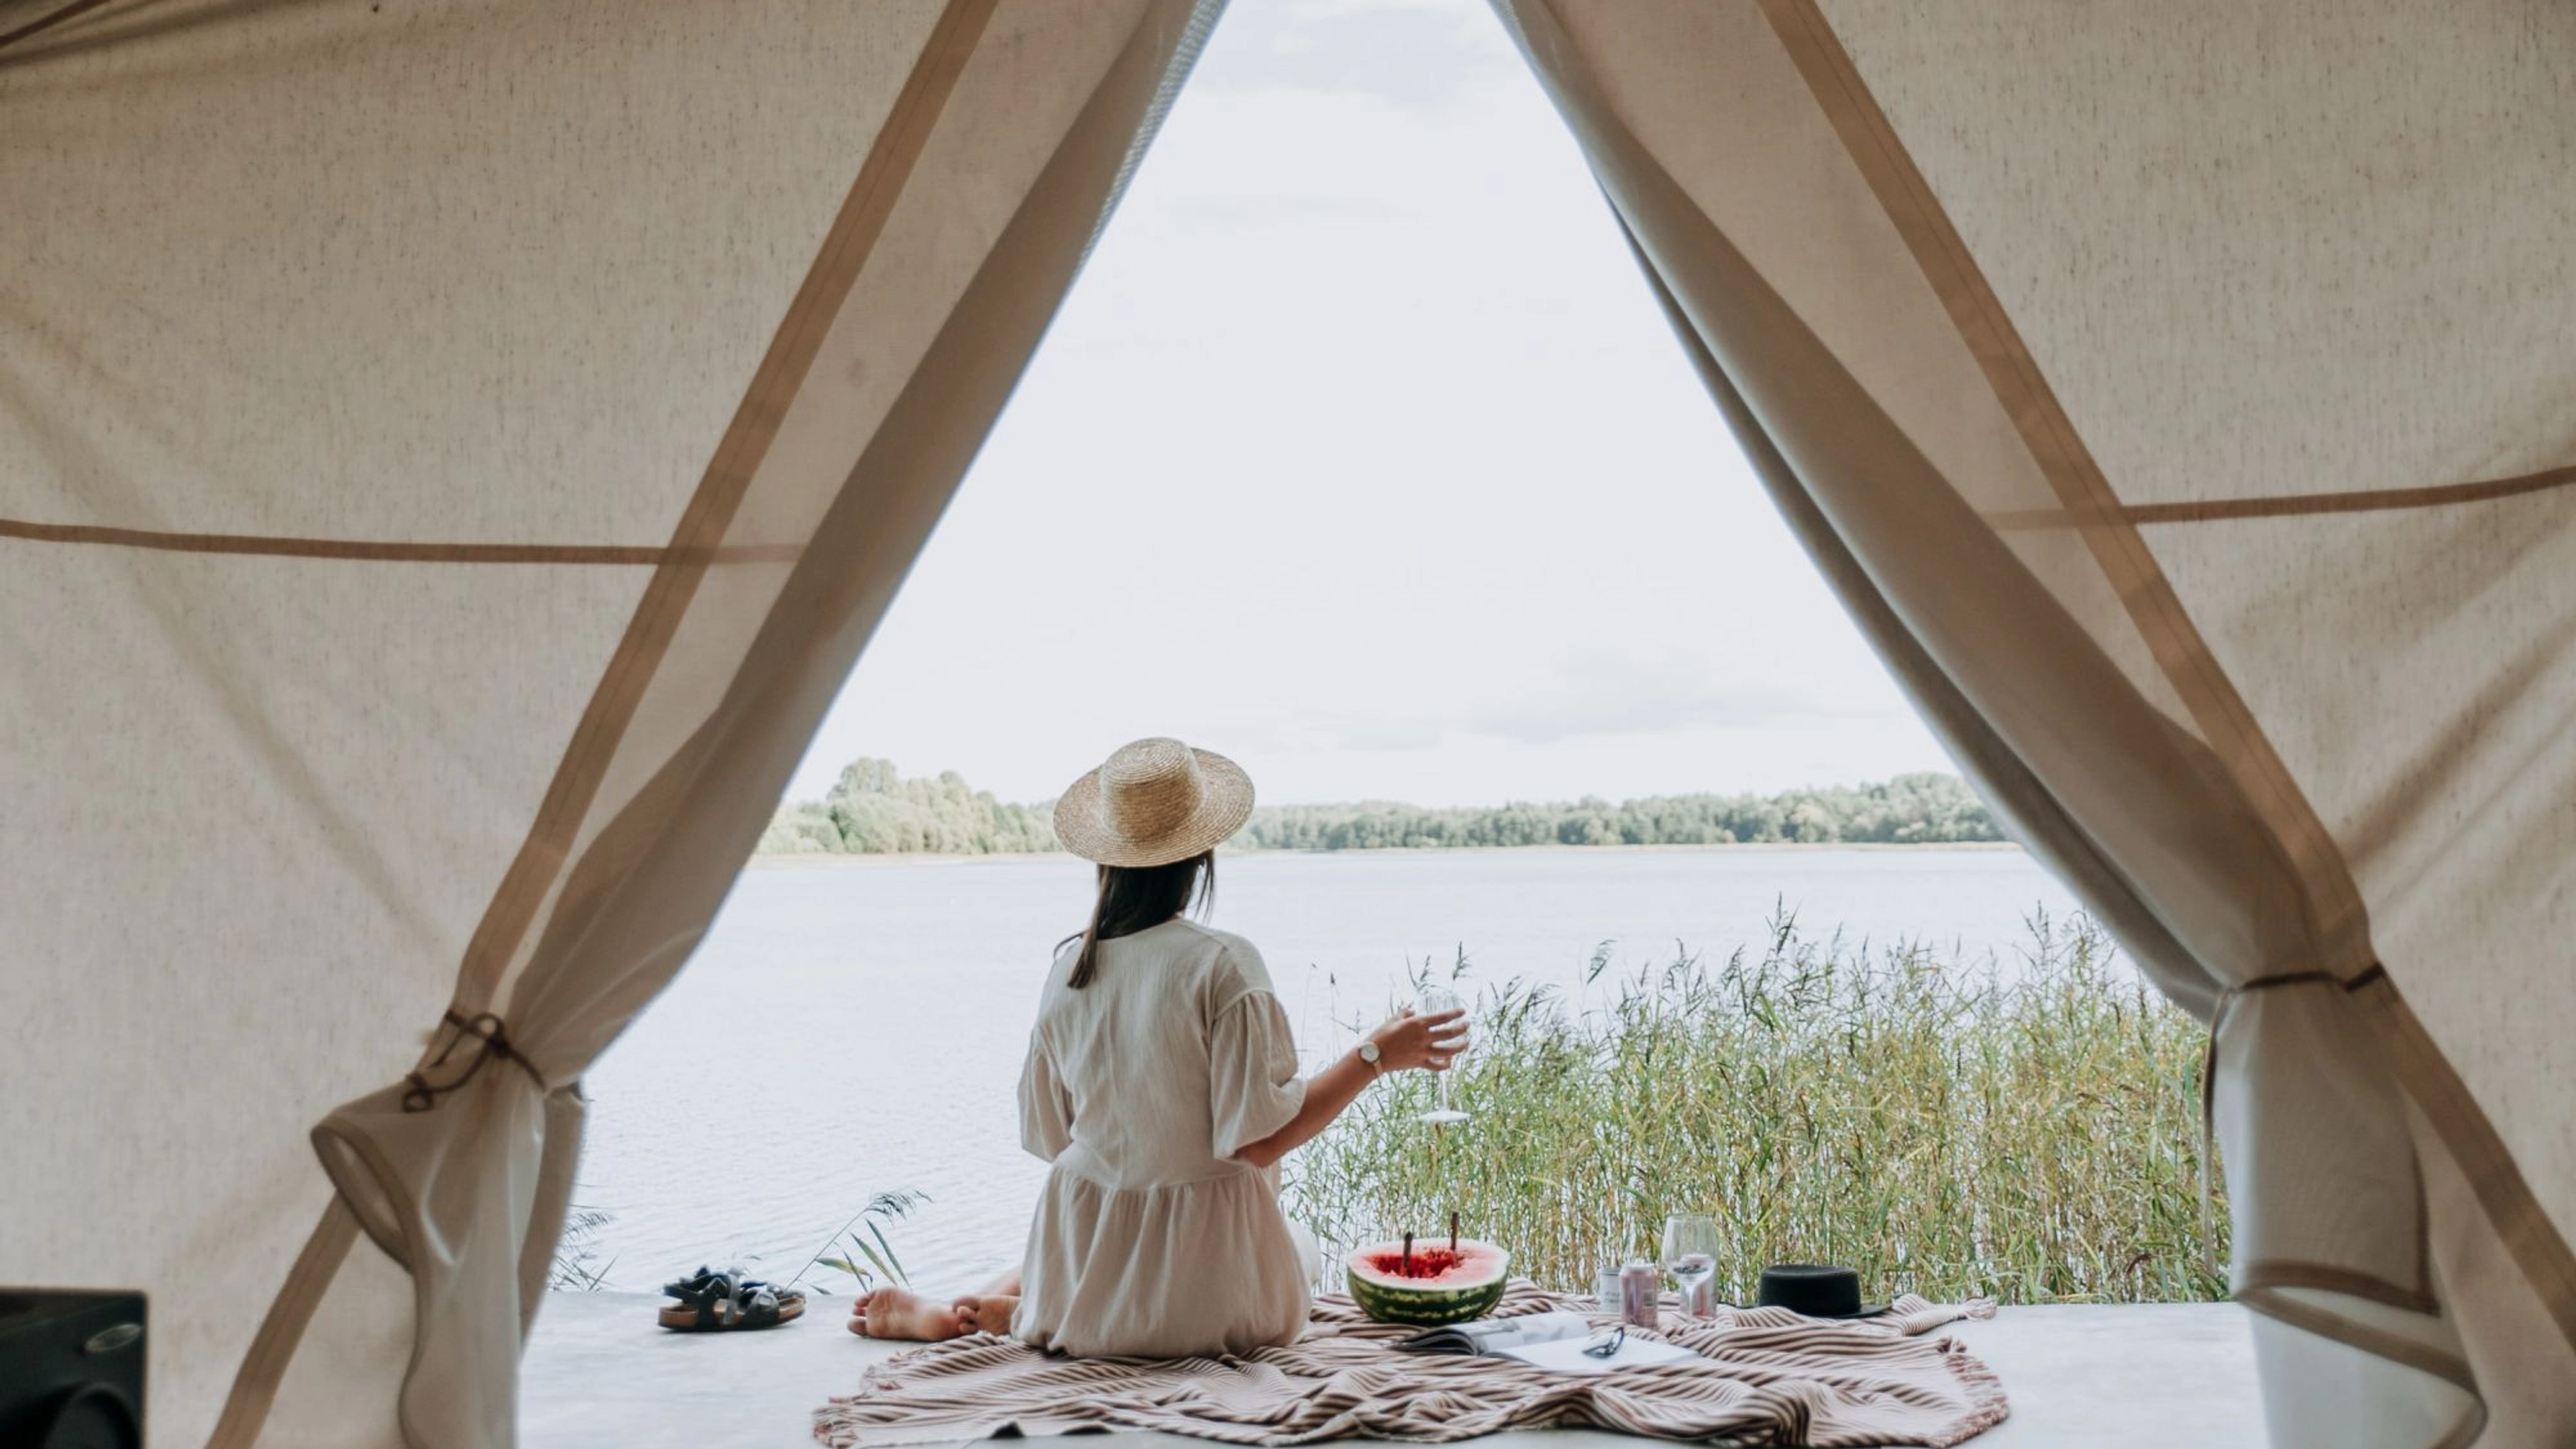 The lovely life of glamping